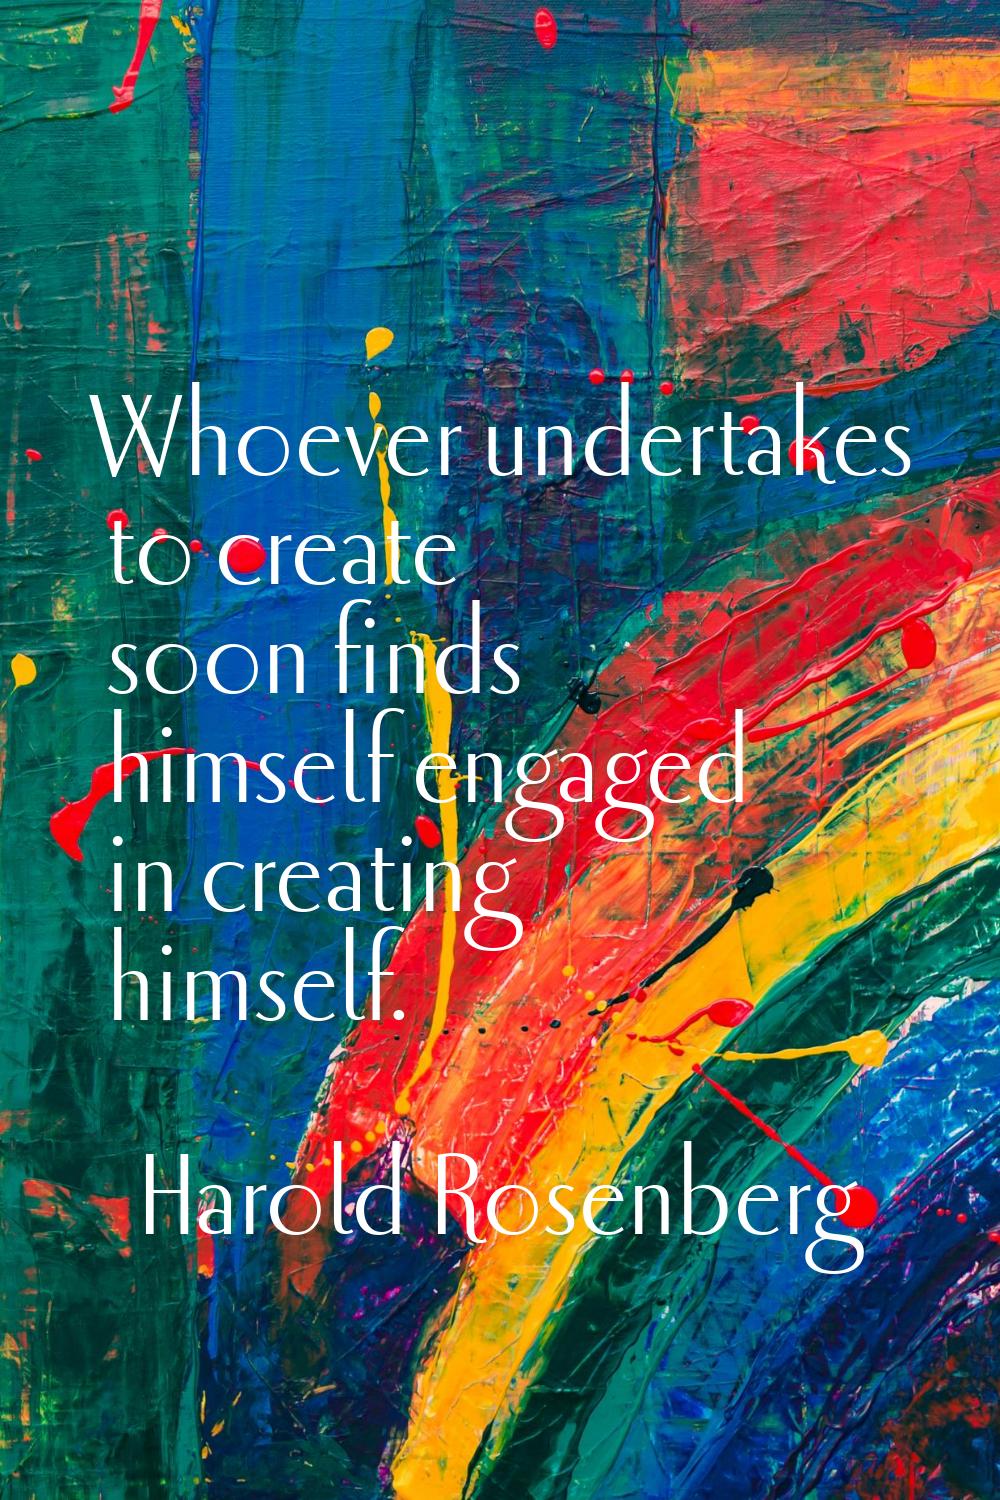 Whoever undertakes to create soon finds himself engaged in creating himself.